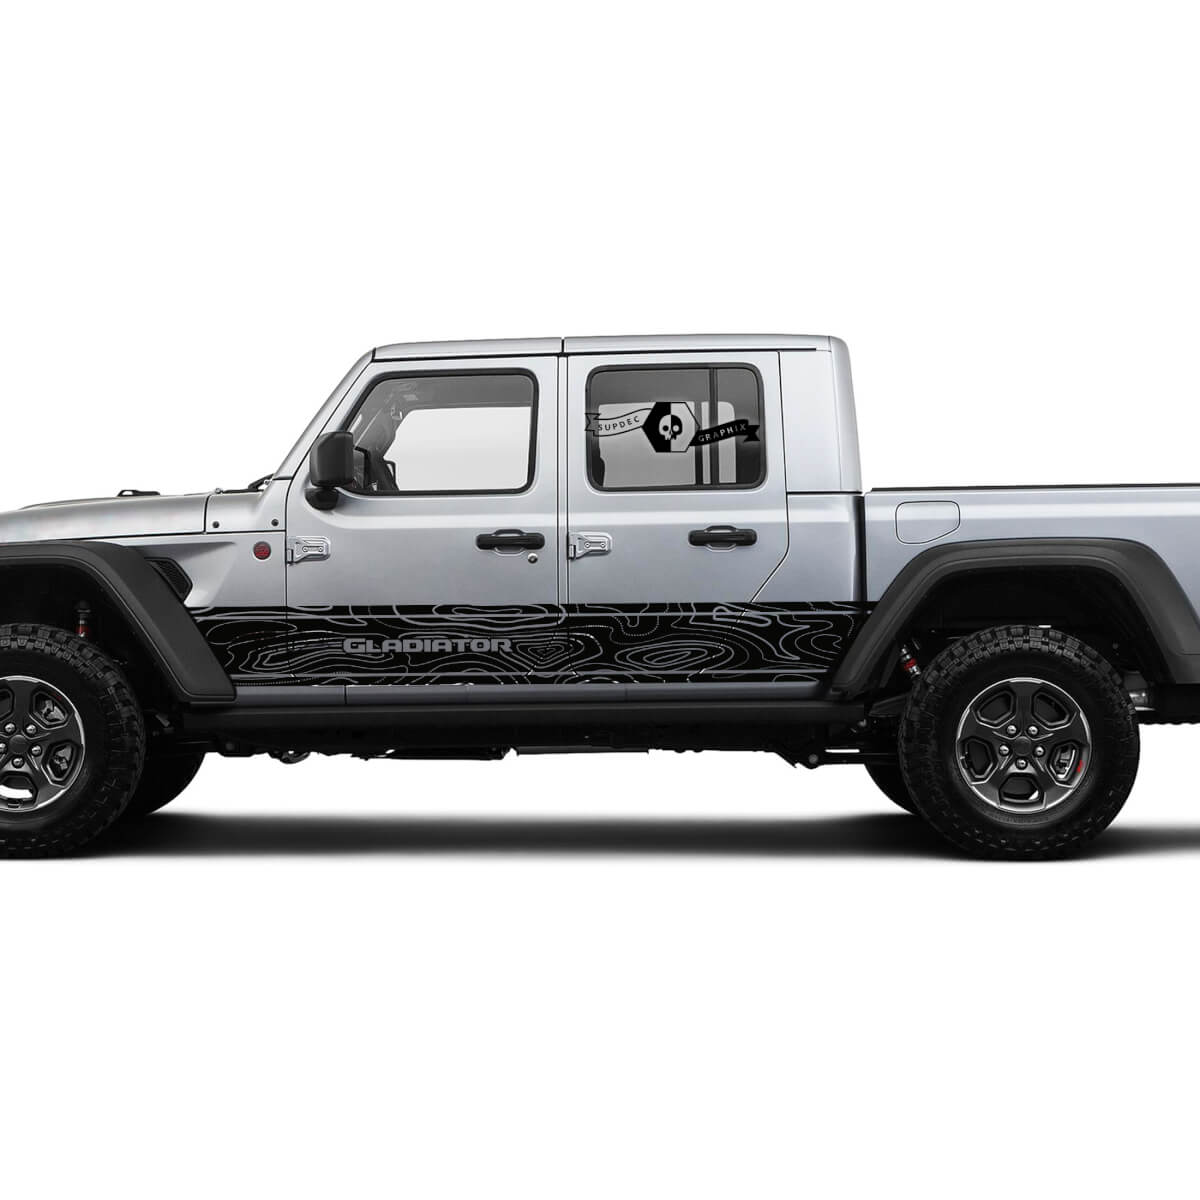 Jeep Gladiator Side Side Door unique Decal Contour Map Vinyl decal sticker Graphics kit for JT 2018-2021 Custom Text